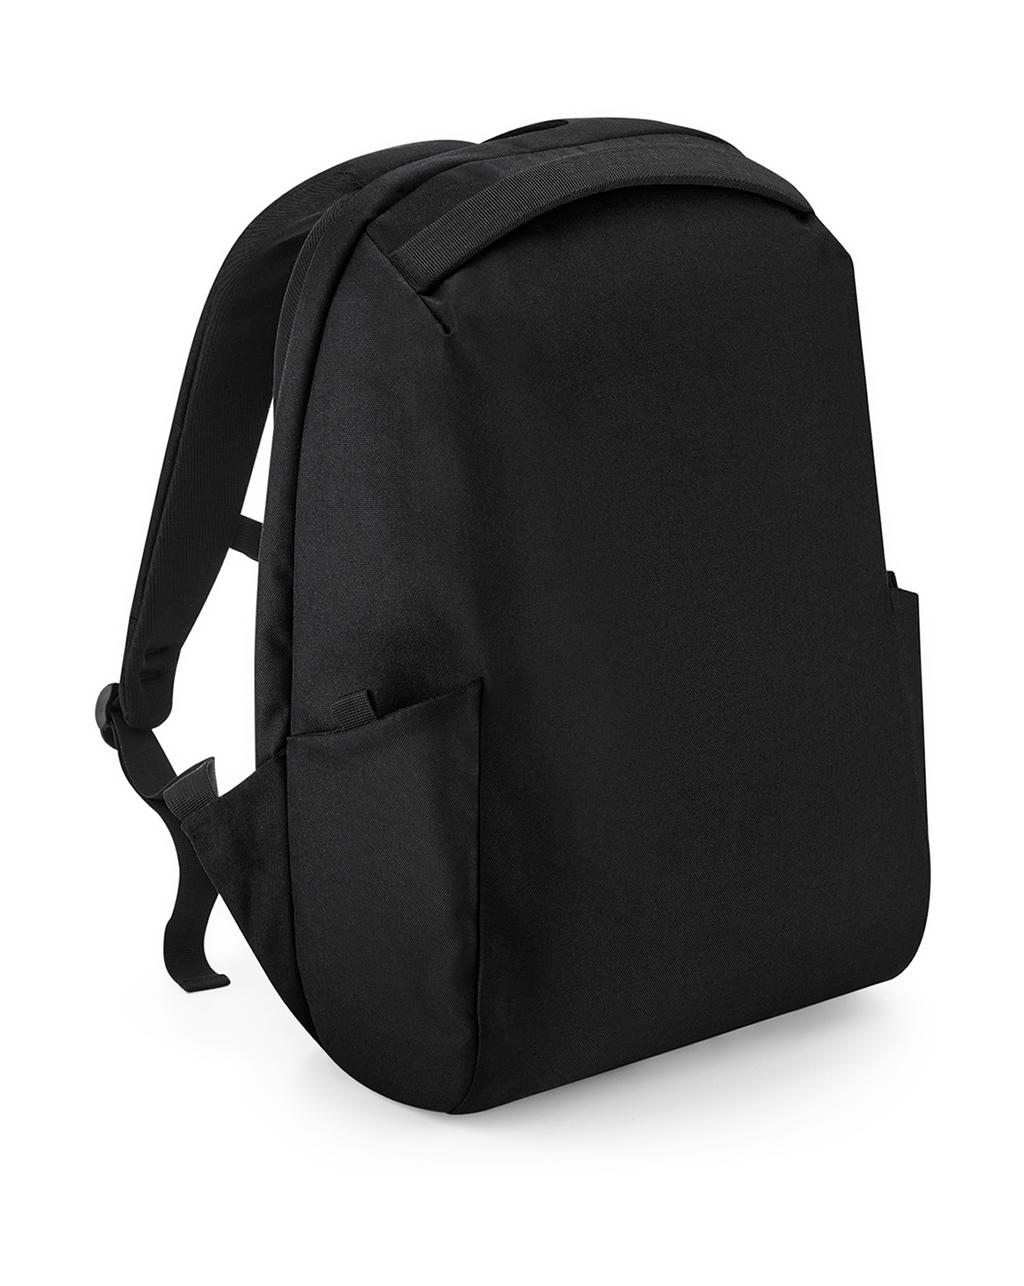 Project Recycled Security Backpack Lite